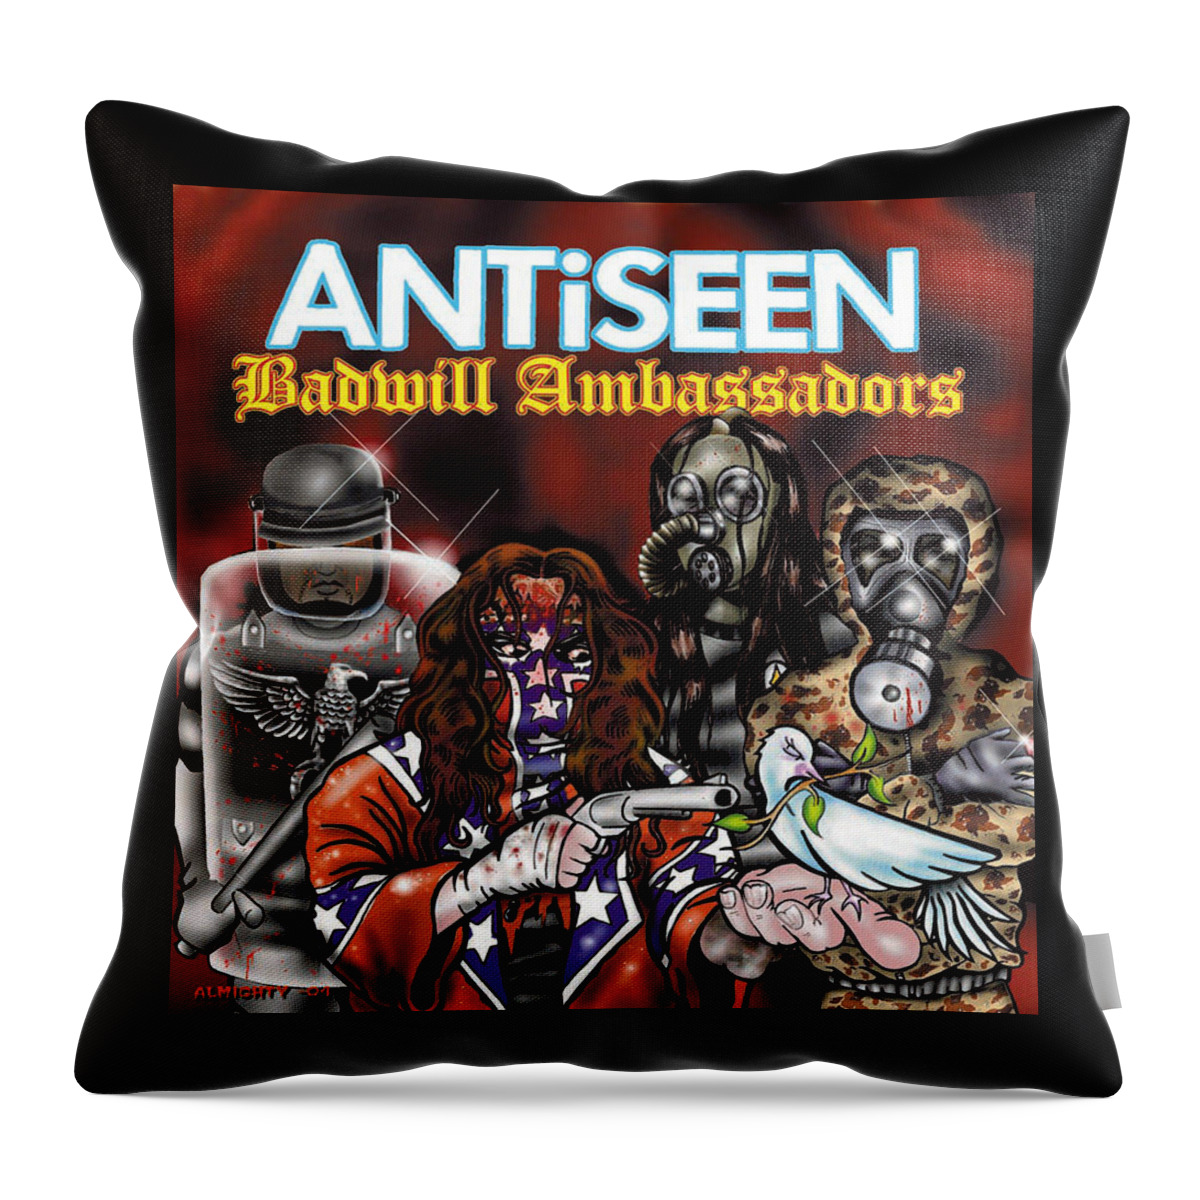  Antiseen Throw Pillow featuring the digital art ANTiSEEN - BADWILL AMBASSADORS cover by Ryan Almighty